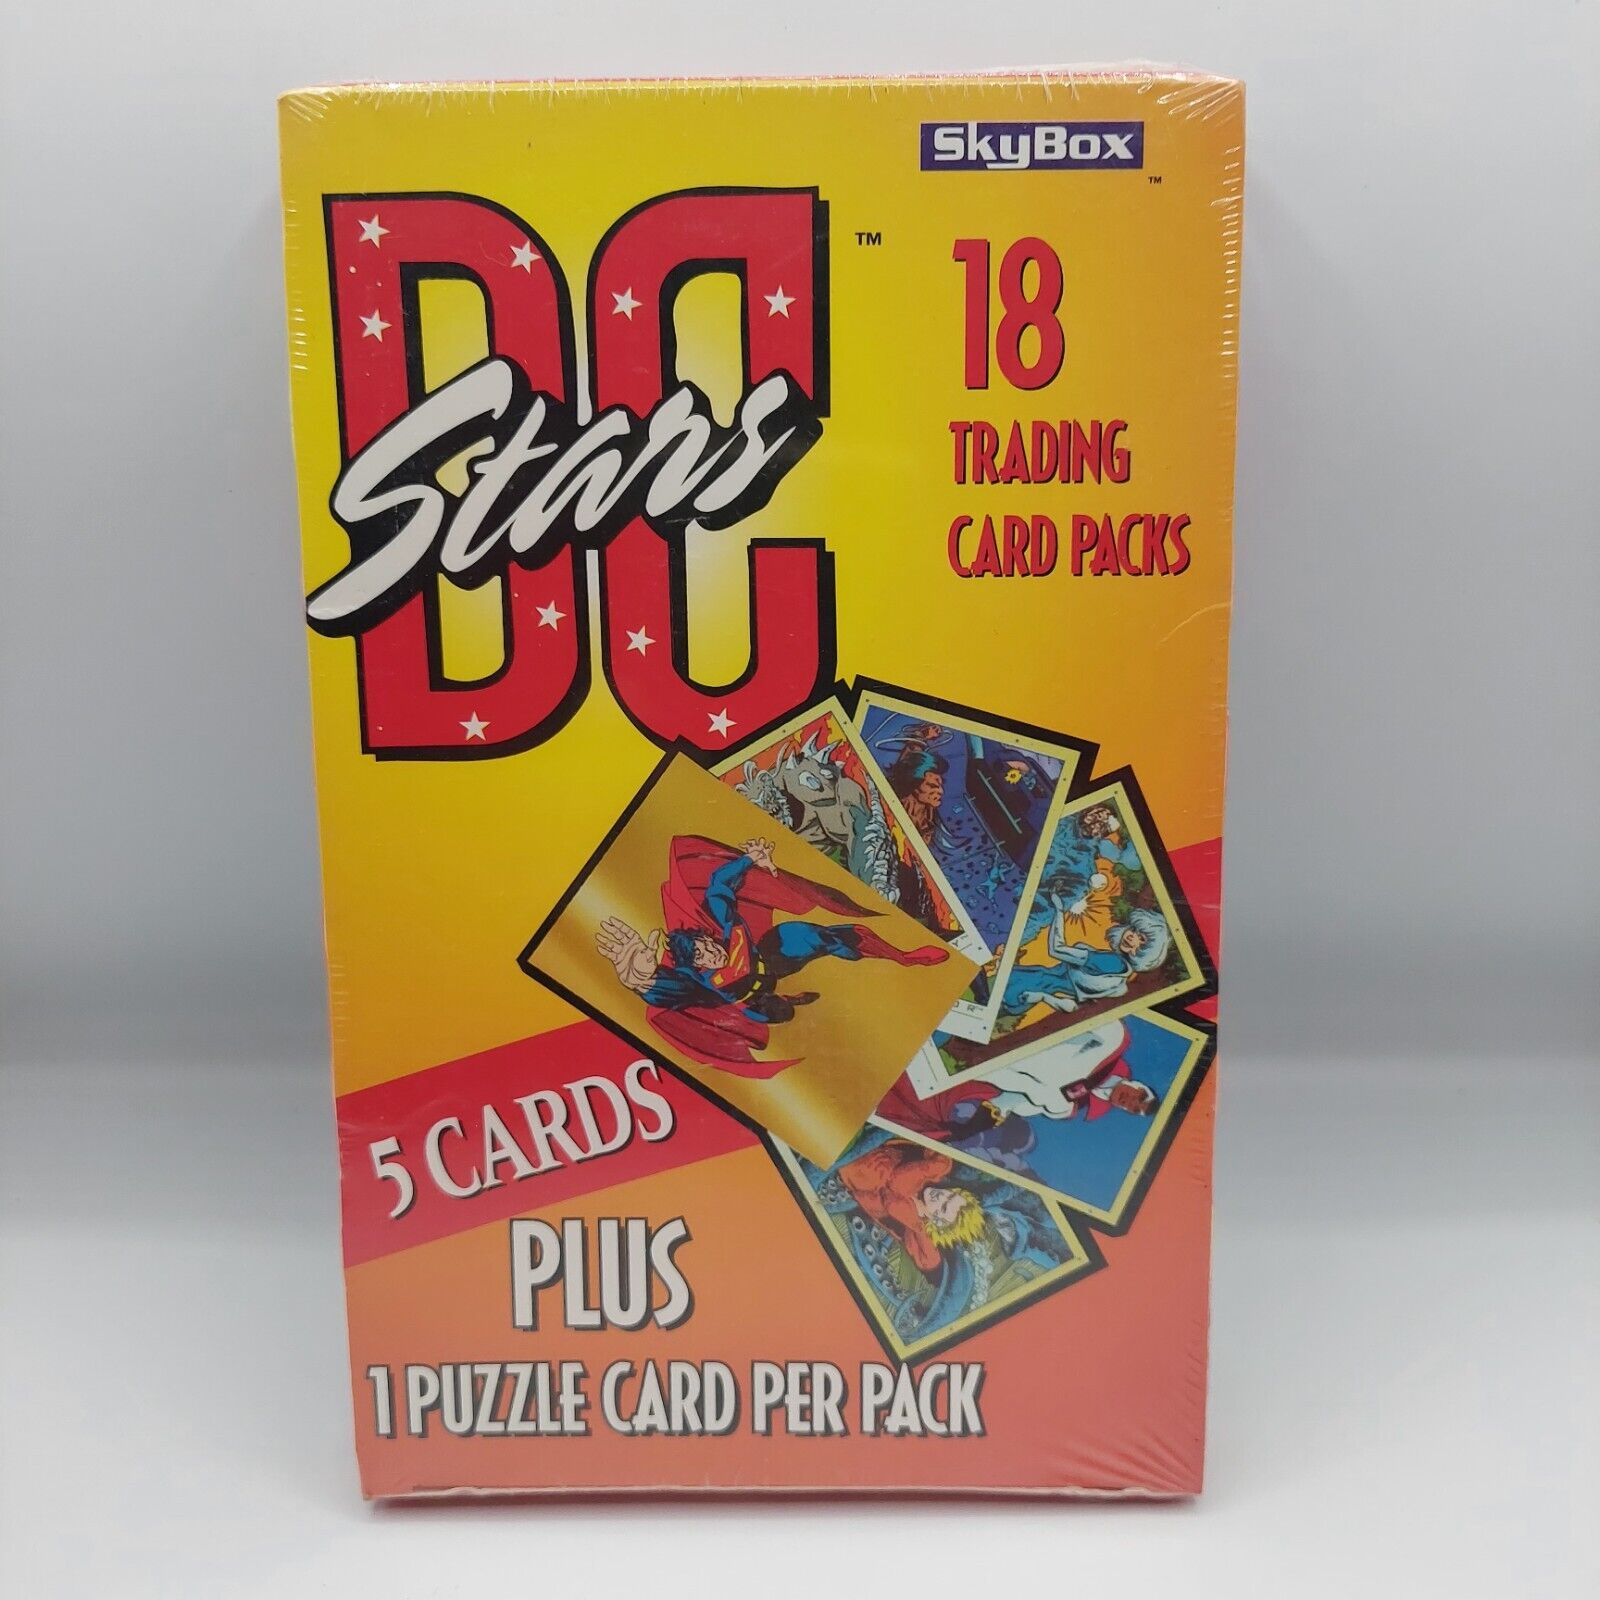 DC STARS TRADING CARDS SEALED BOX OF 18 PACKS BY SKYBOX 1996